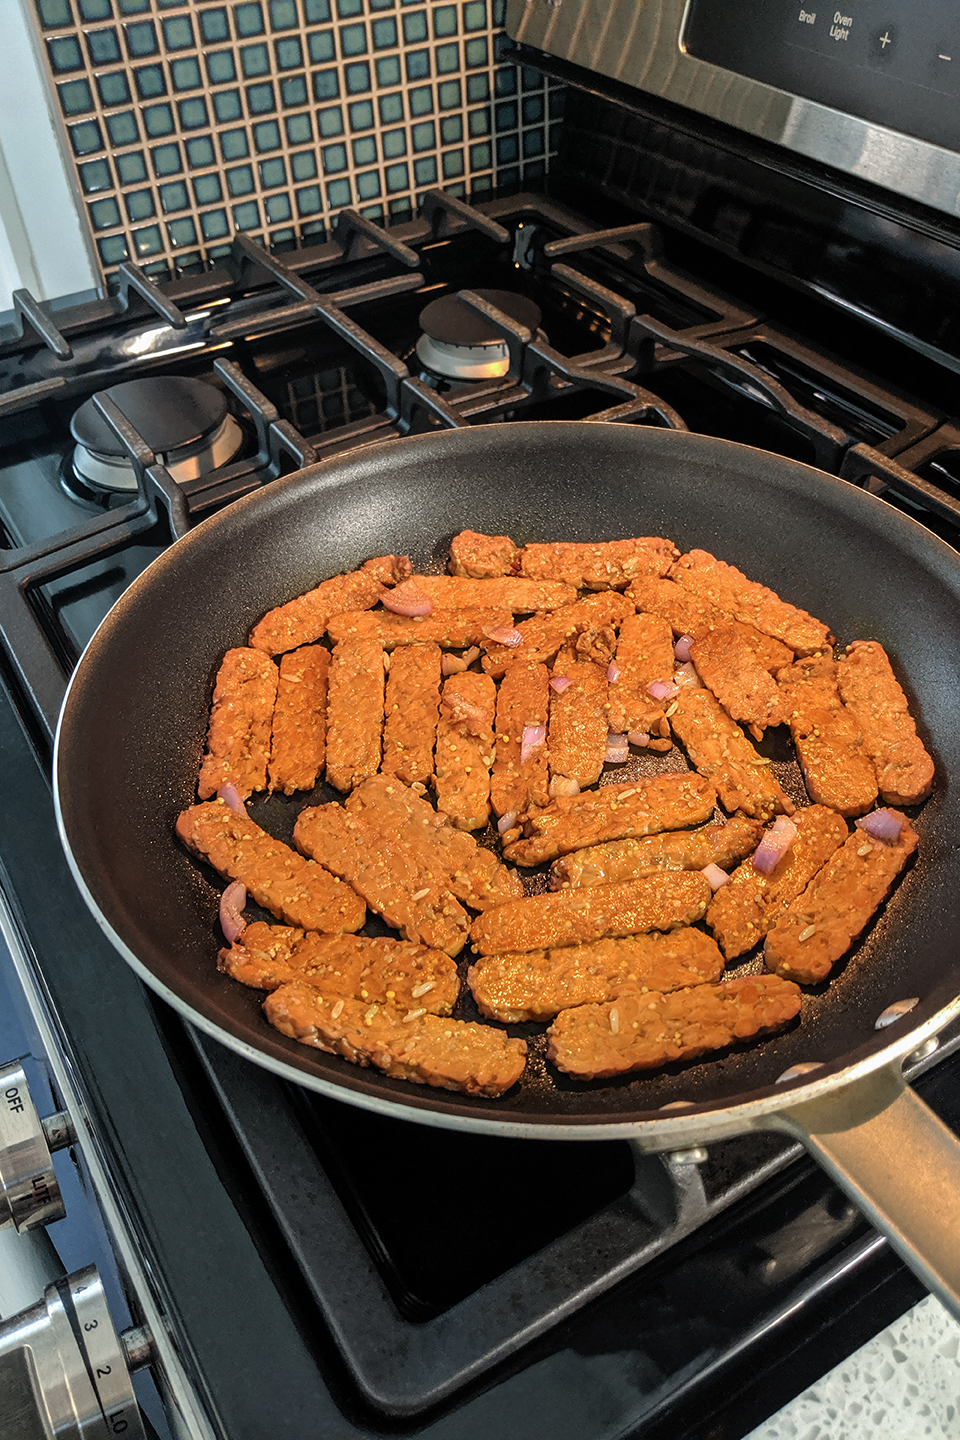  Tempeh being cooked in a large skillet on a stove.  